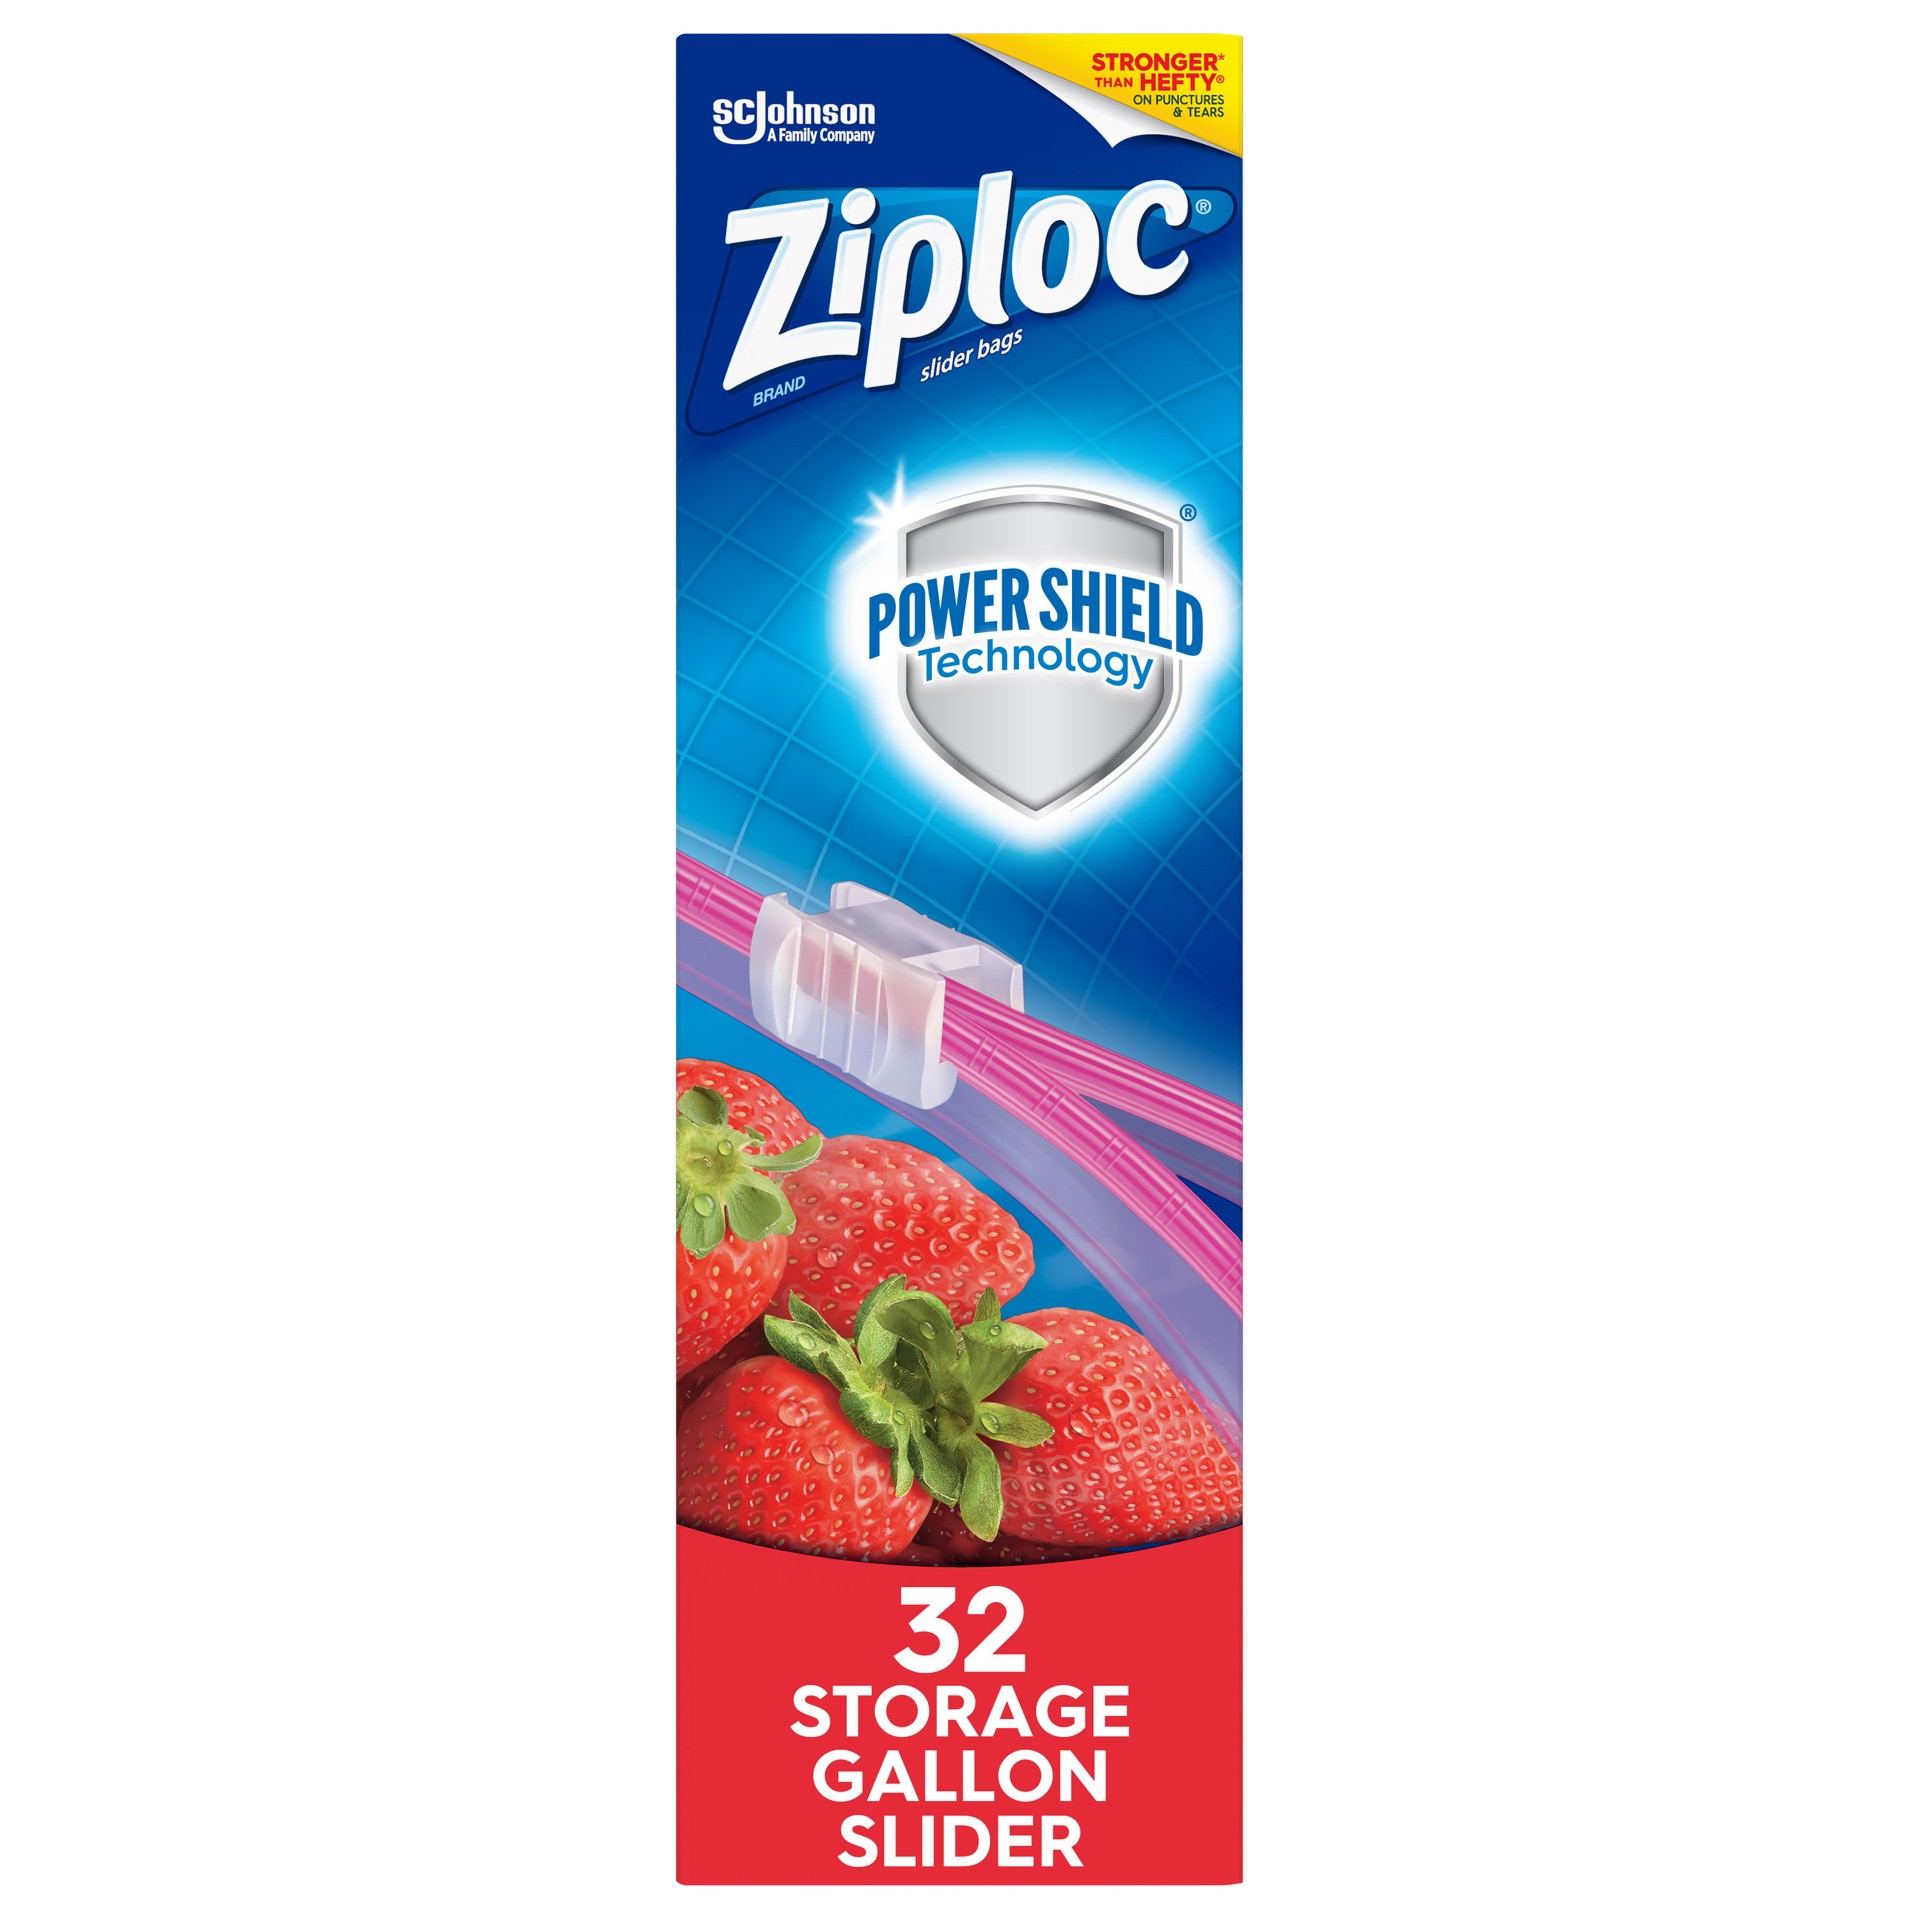 slide 4 of 4, Ziploc Slider Storage Gallon Bags with Power Shield Technology, 32 Count, 32 ct